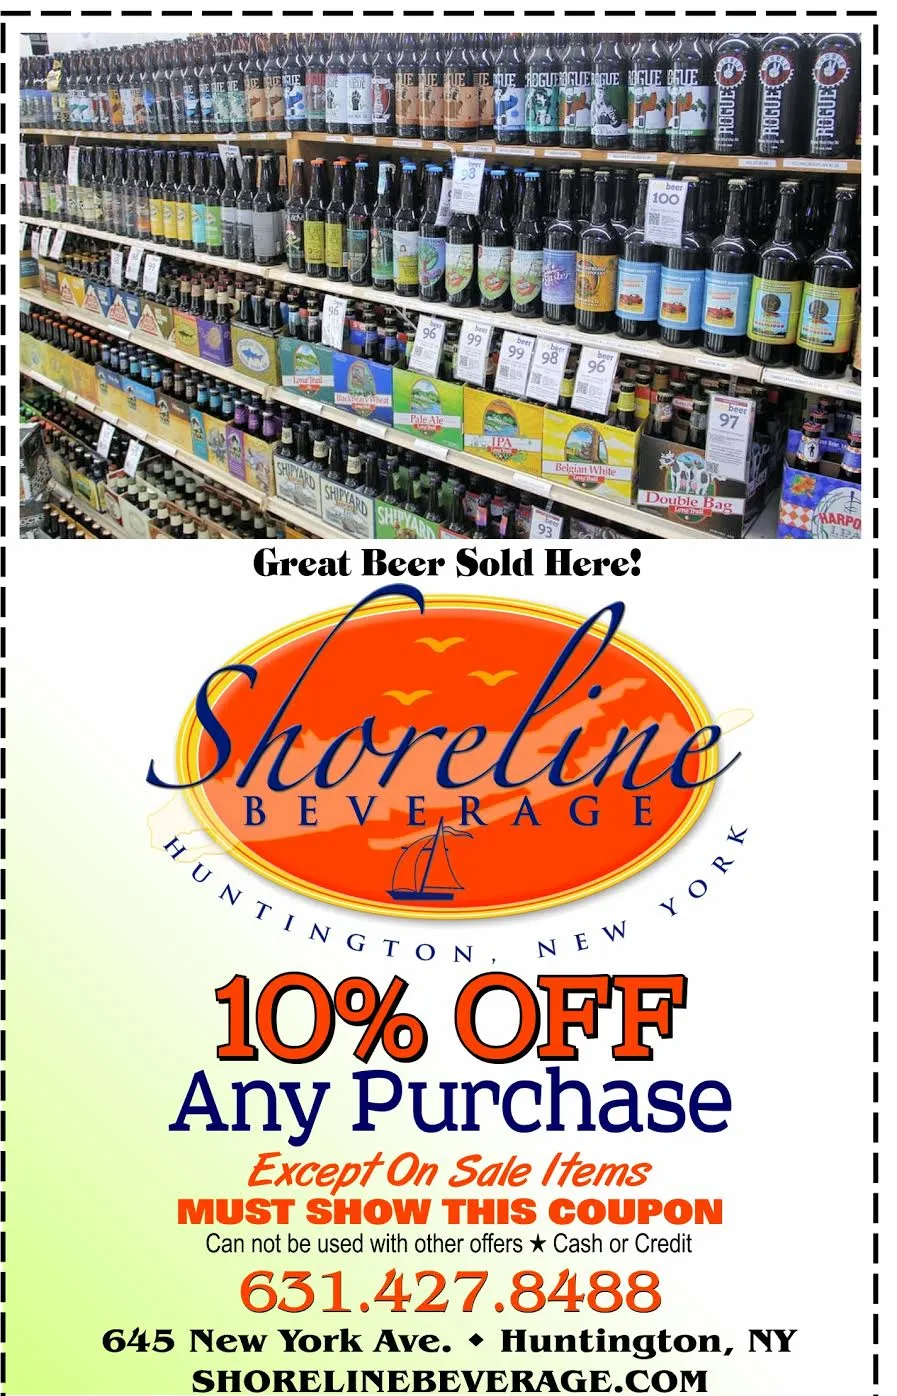 A coupon for shoreline beverage offers 10 % off any purchase